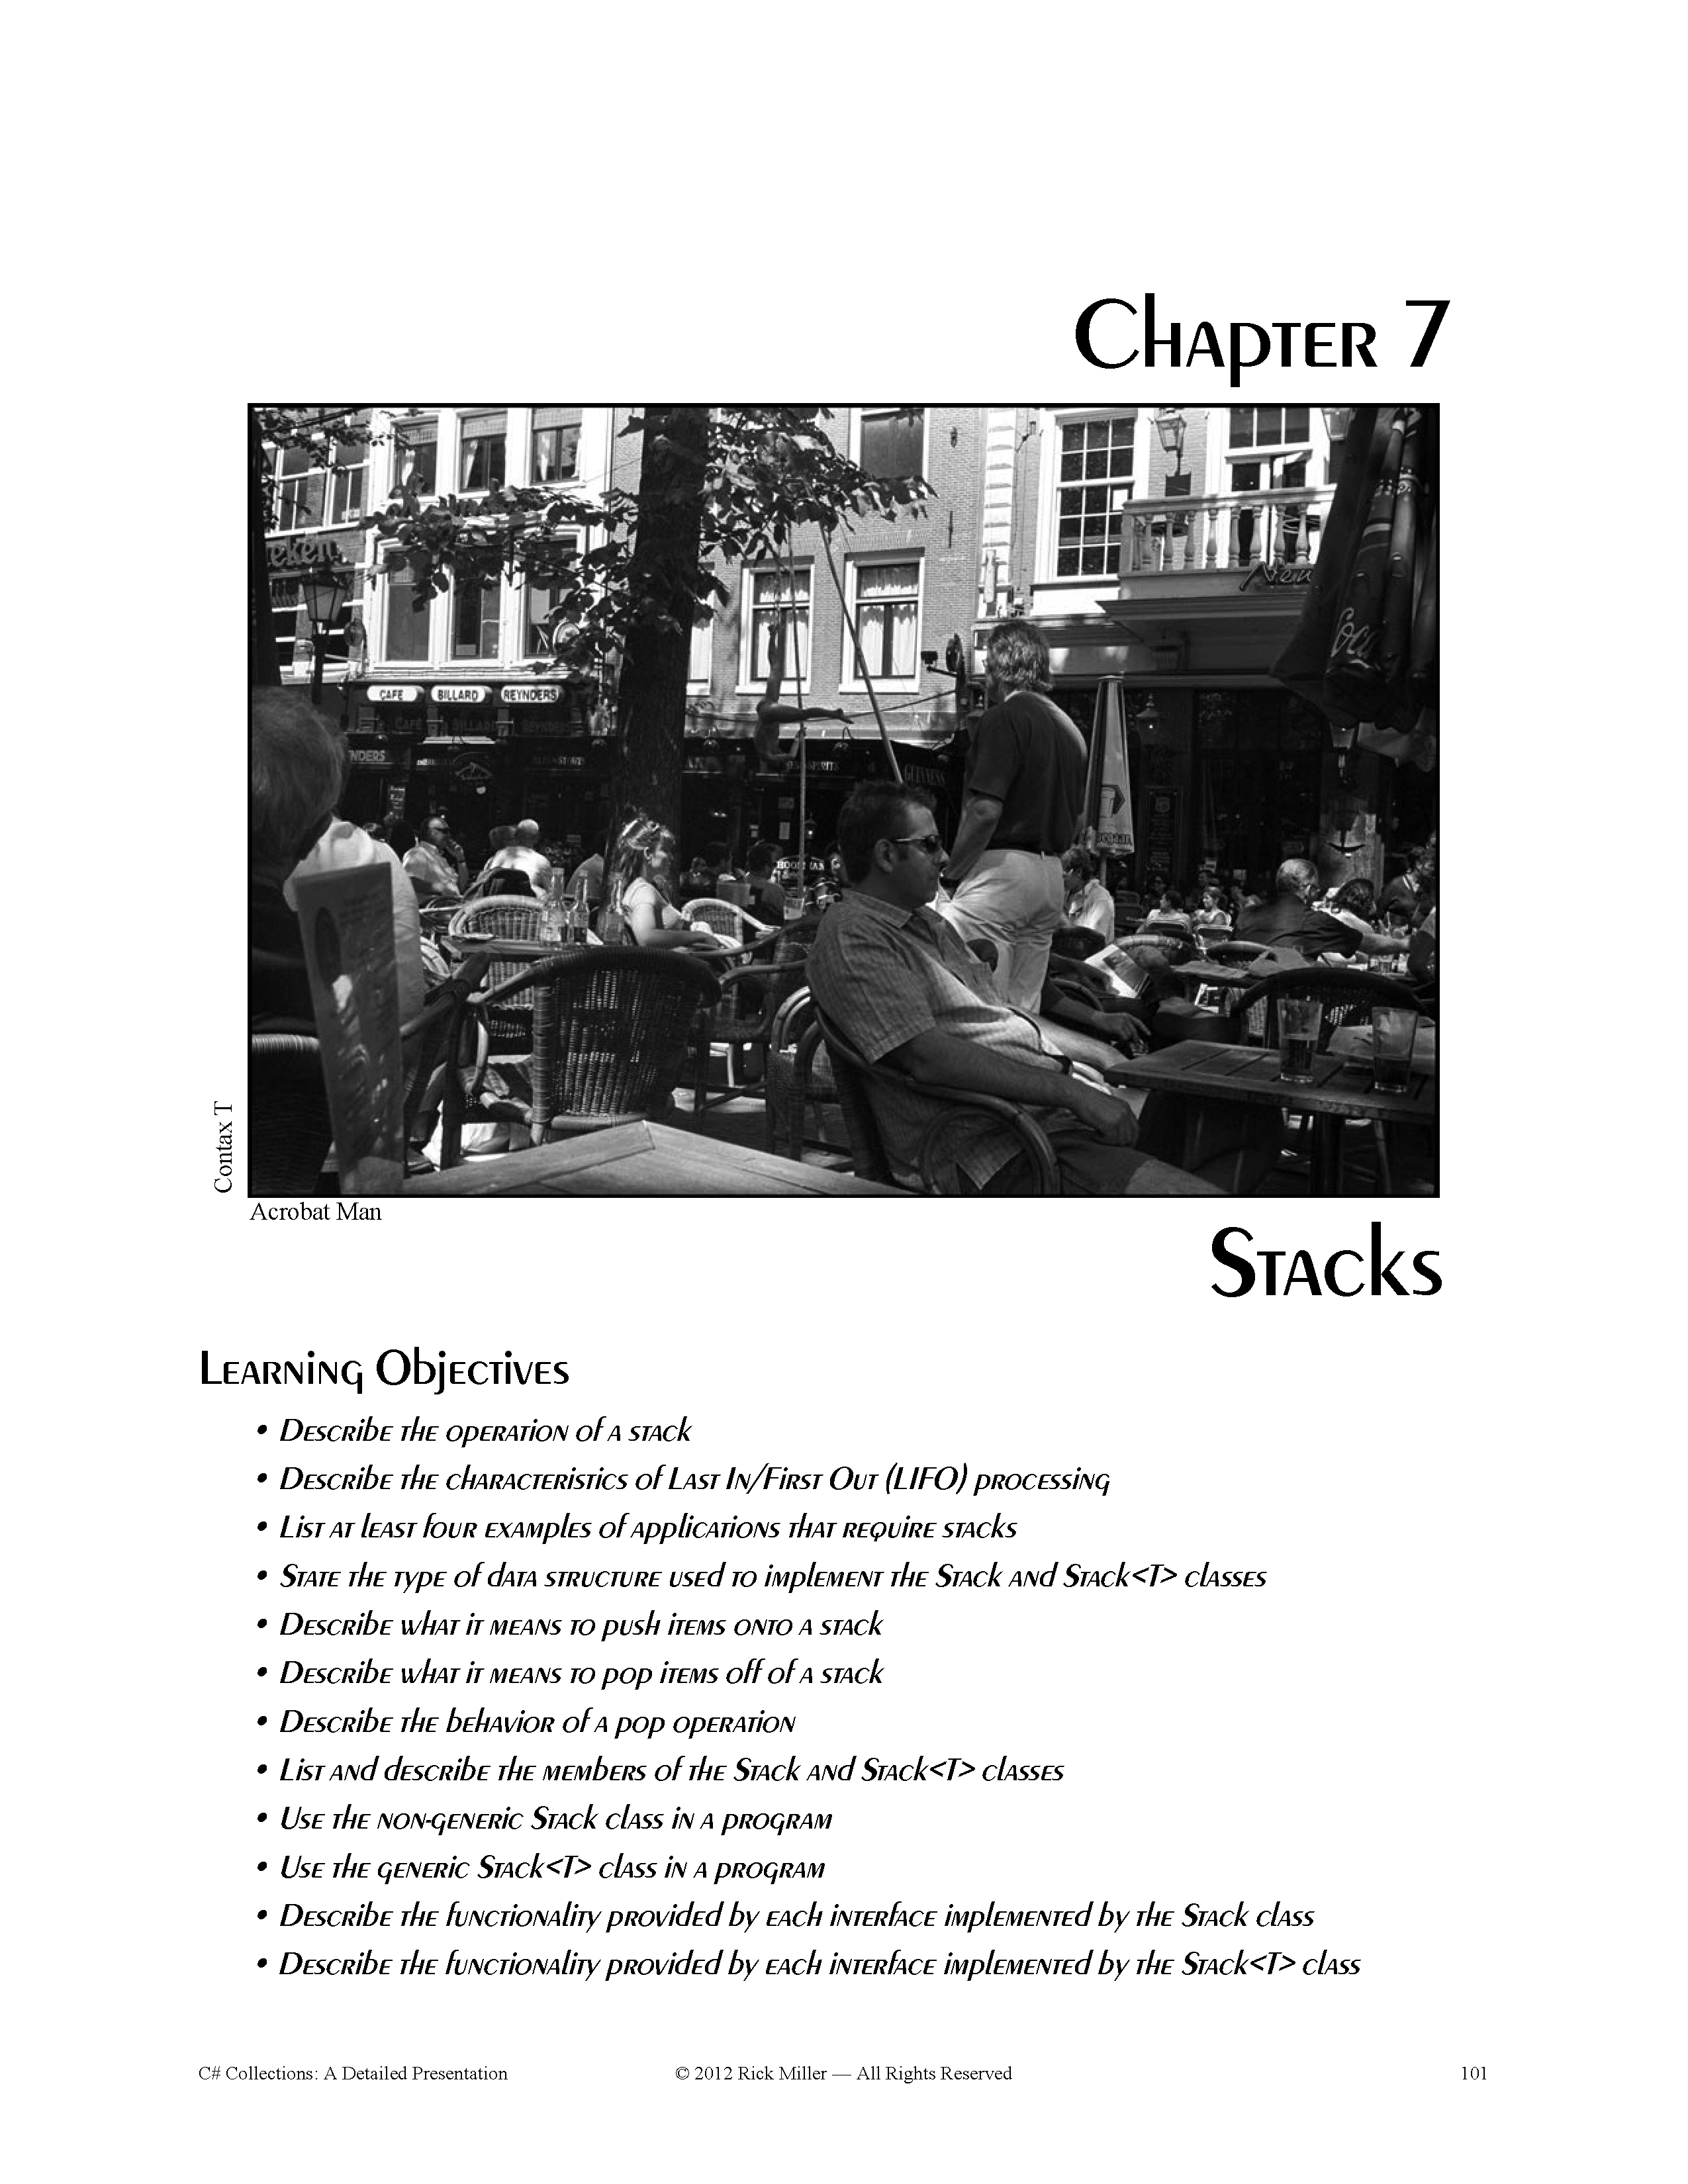 C# Collections 1st ED Chapter 7 Page 1 Thumb